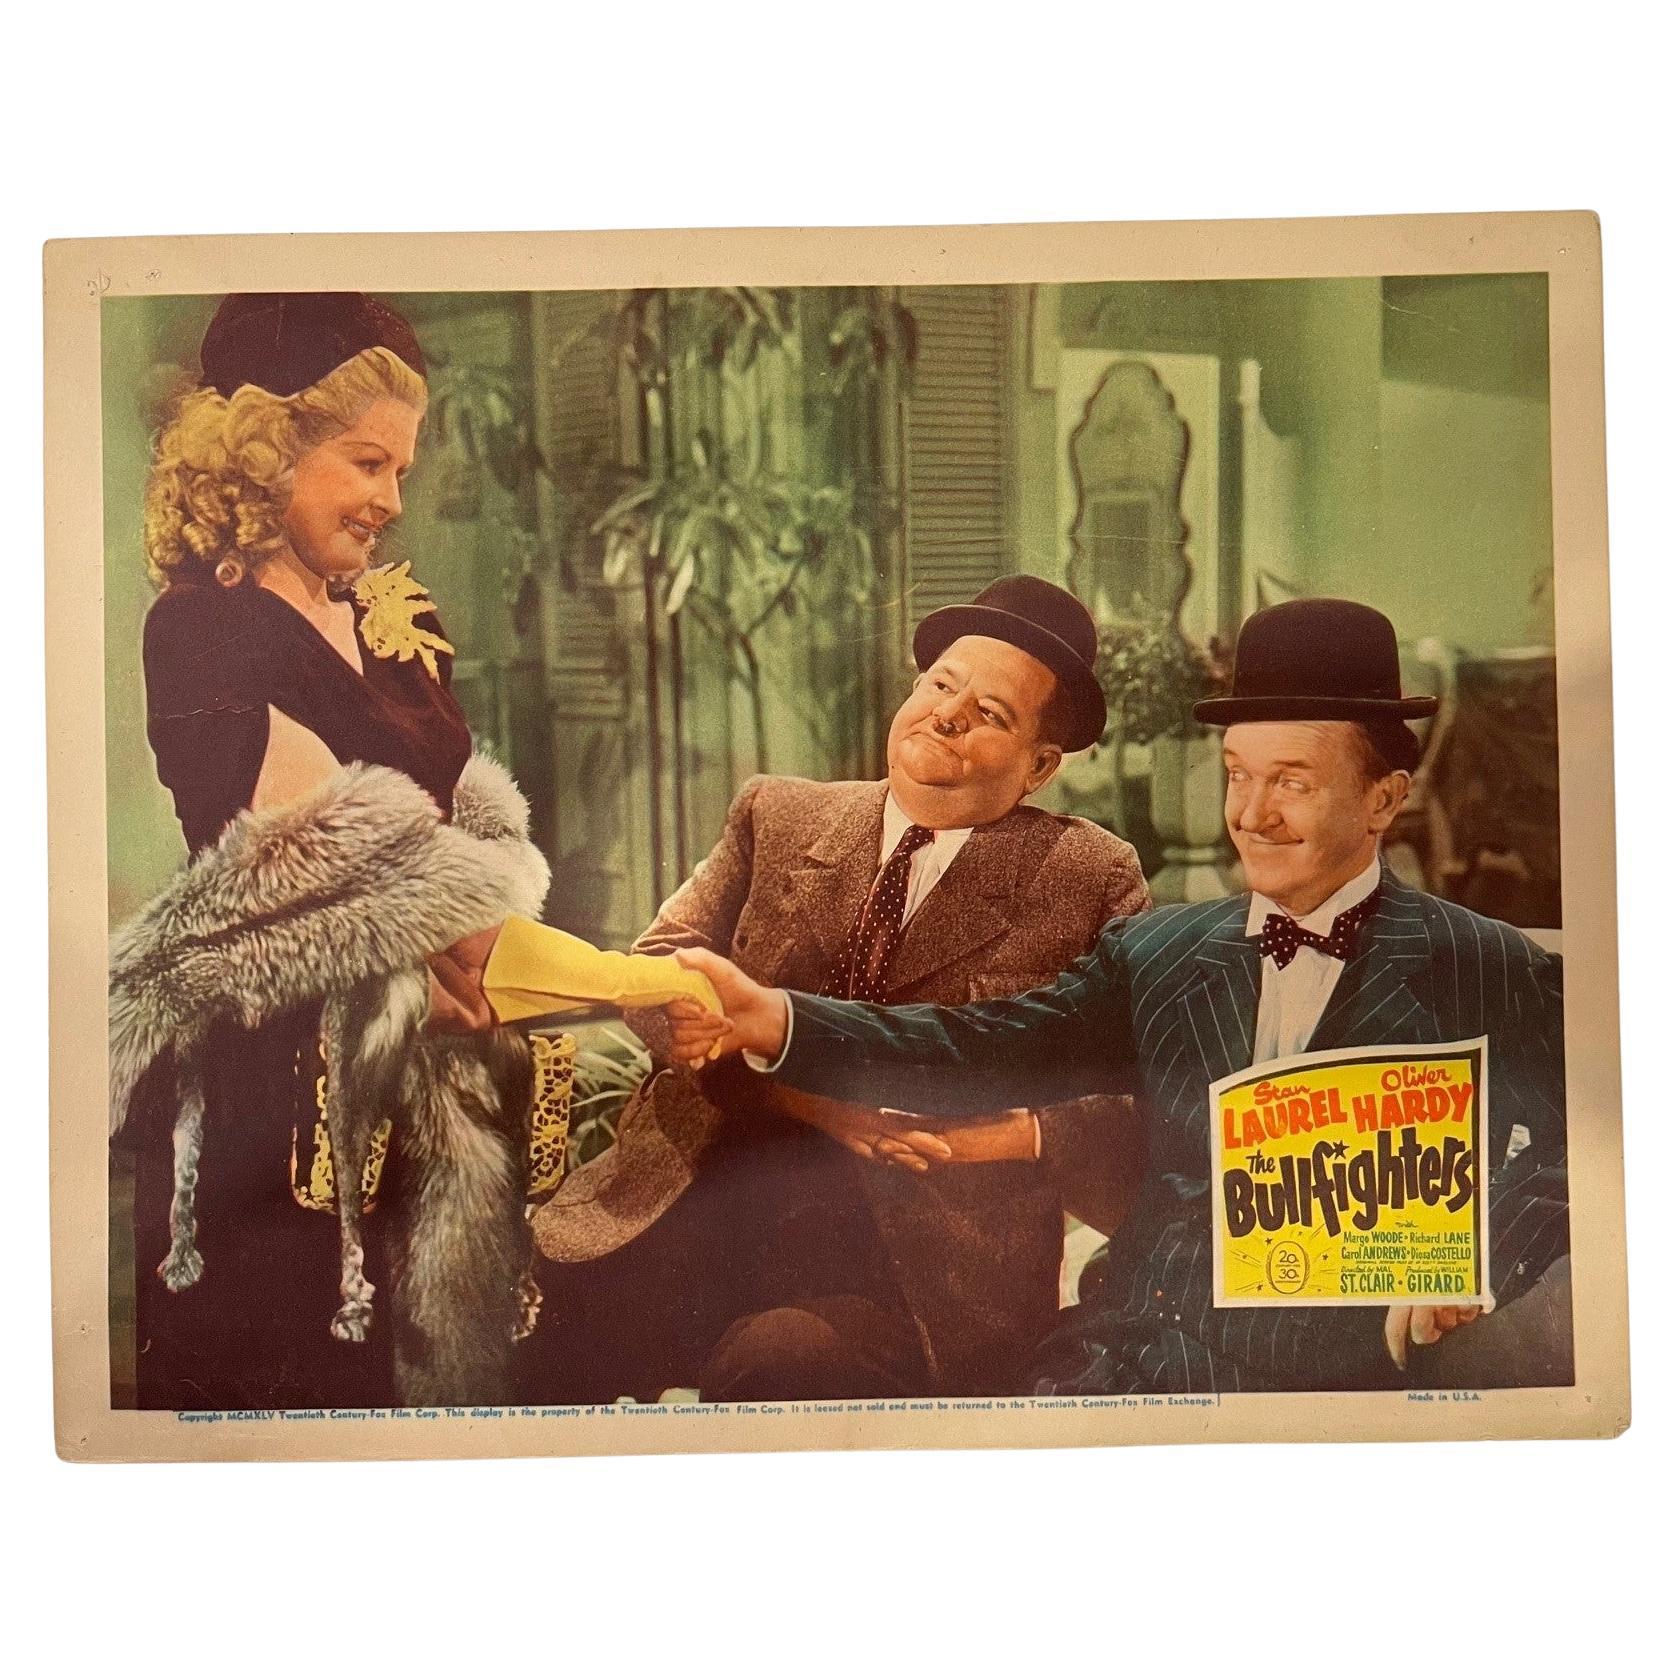 Laurel and Hardy "The Bullfighters" Lobby Cards 